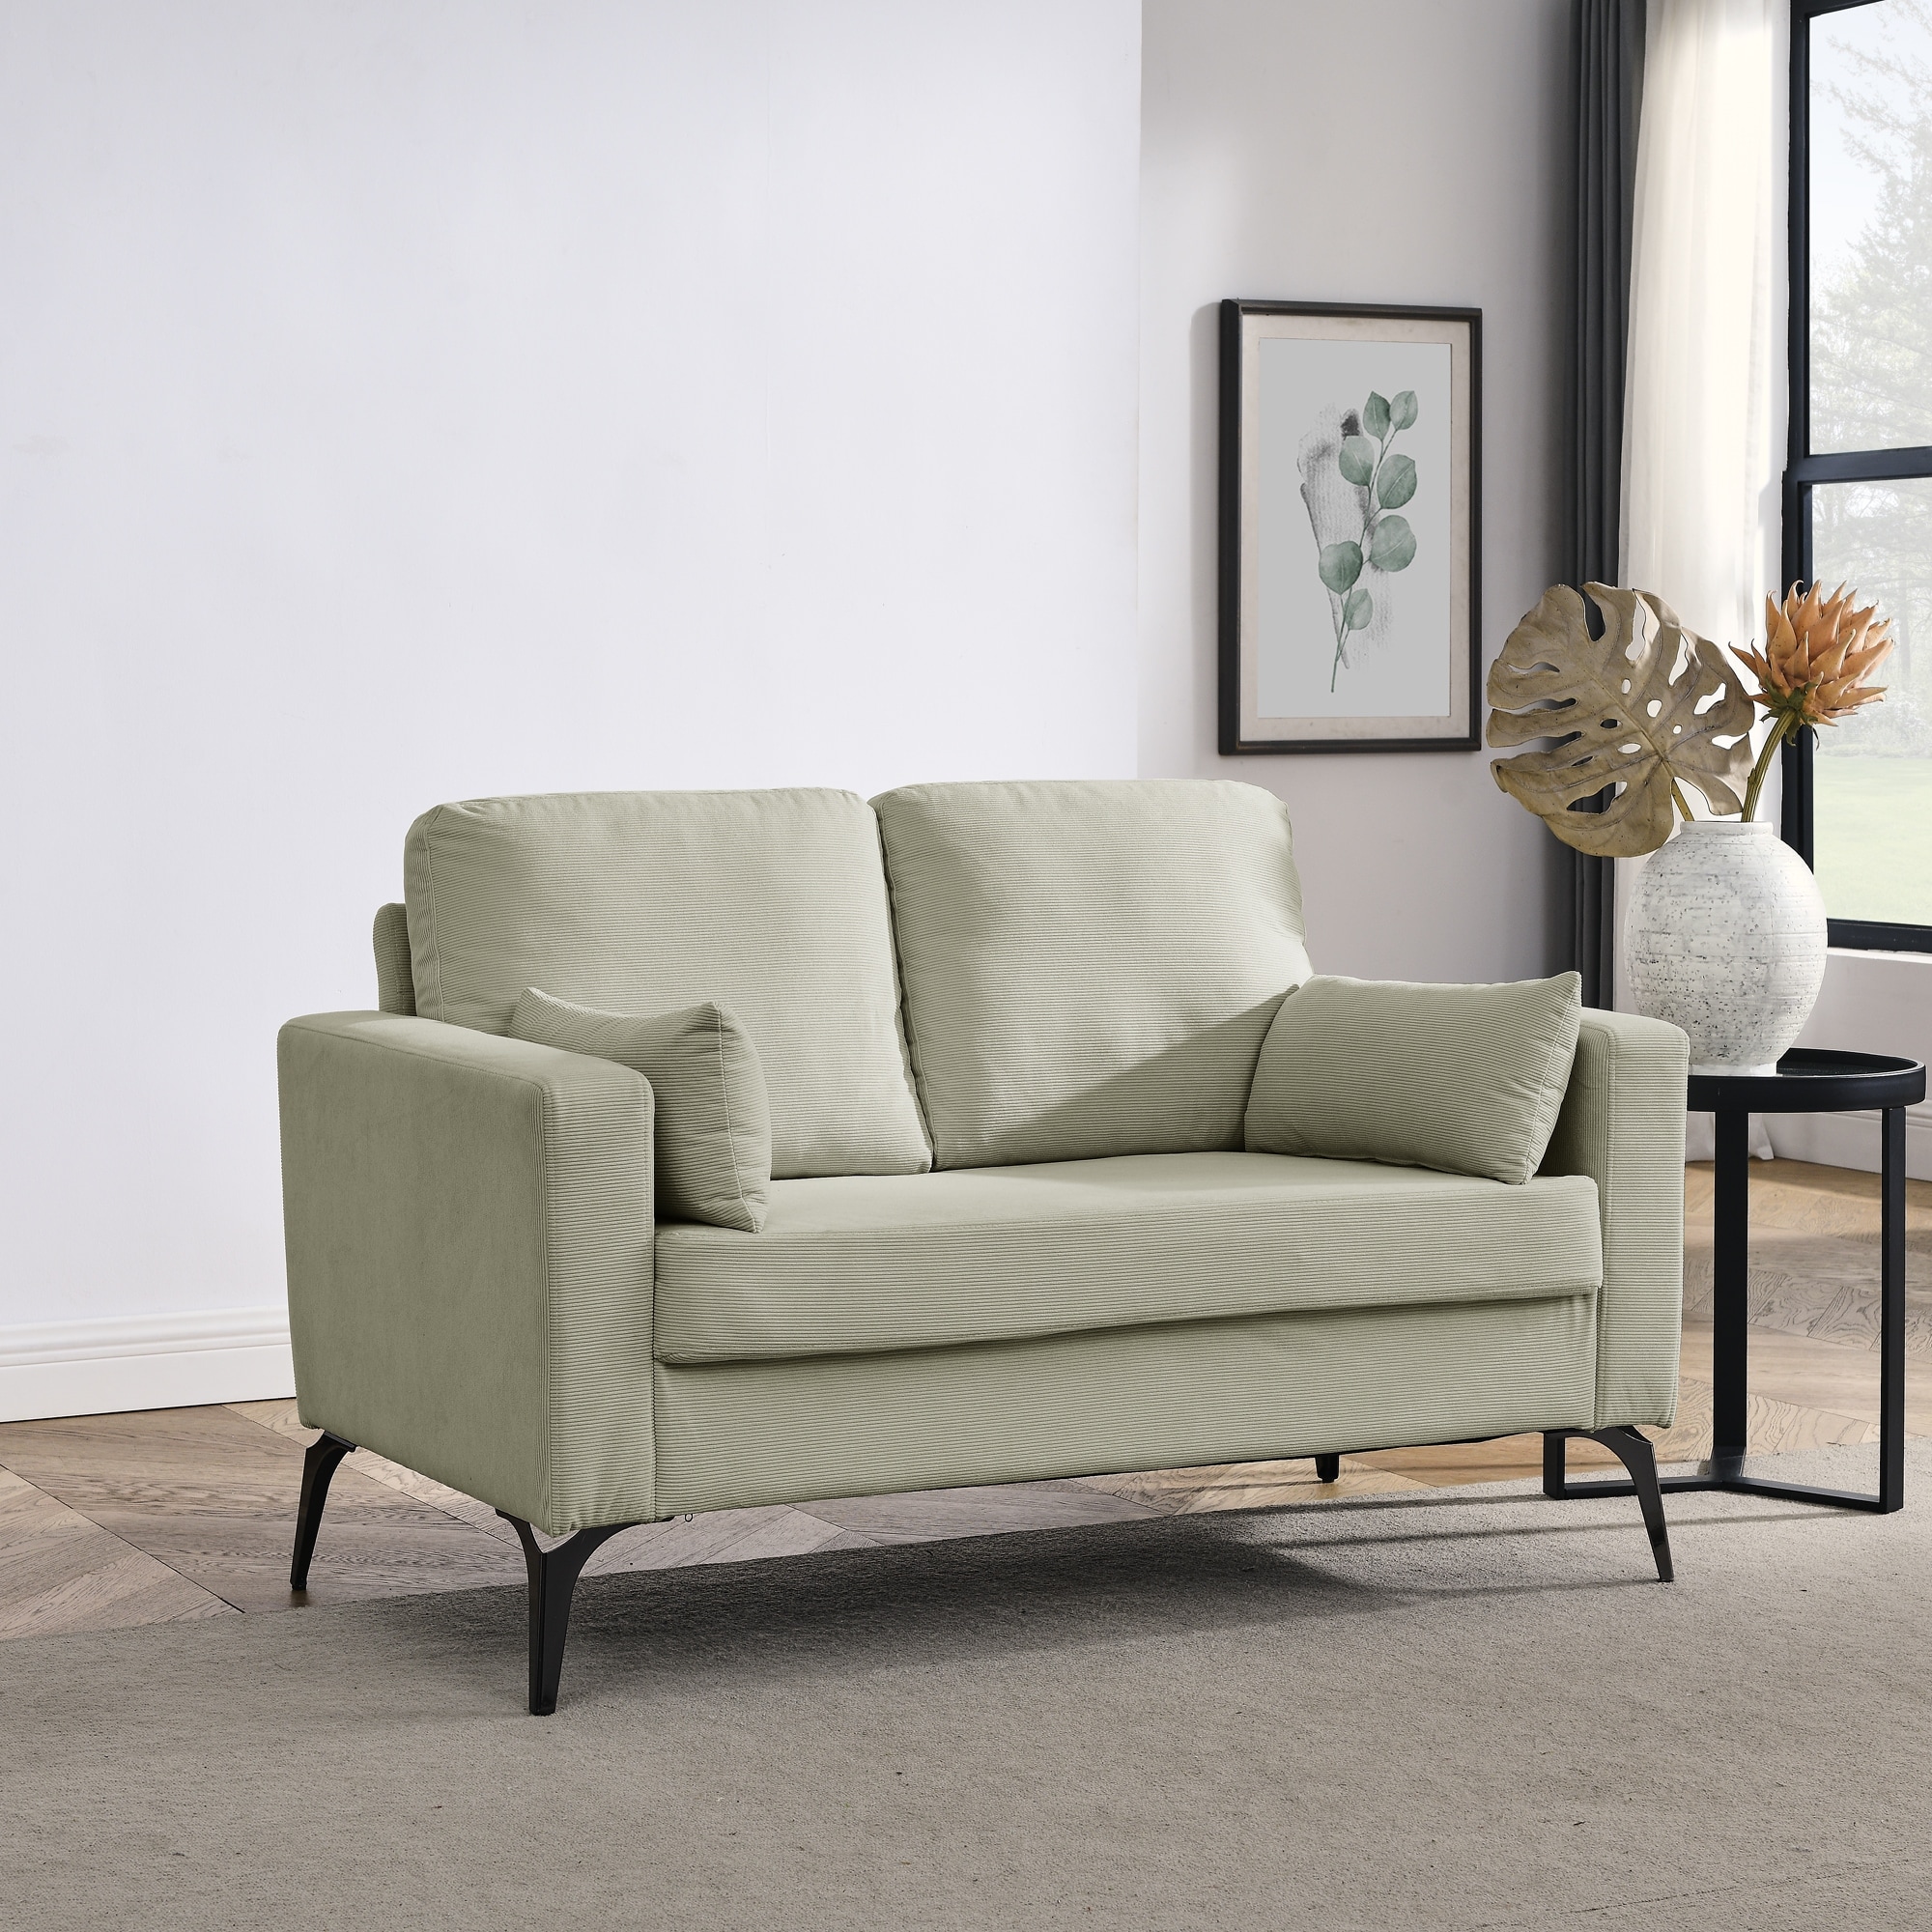 https://ak1.ostkcdn.com/images/products/is/images/direct/0f2770145e5a679ab418cf18d42d7ebc39795465/Modern-Minimalist-Corduroy-Loveseat-Sofa-with-Two-Small-Pillows.jpg